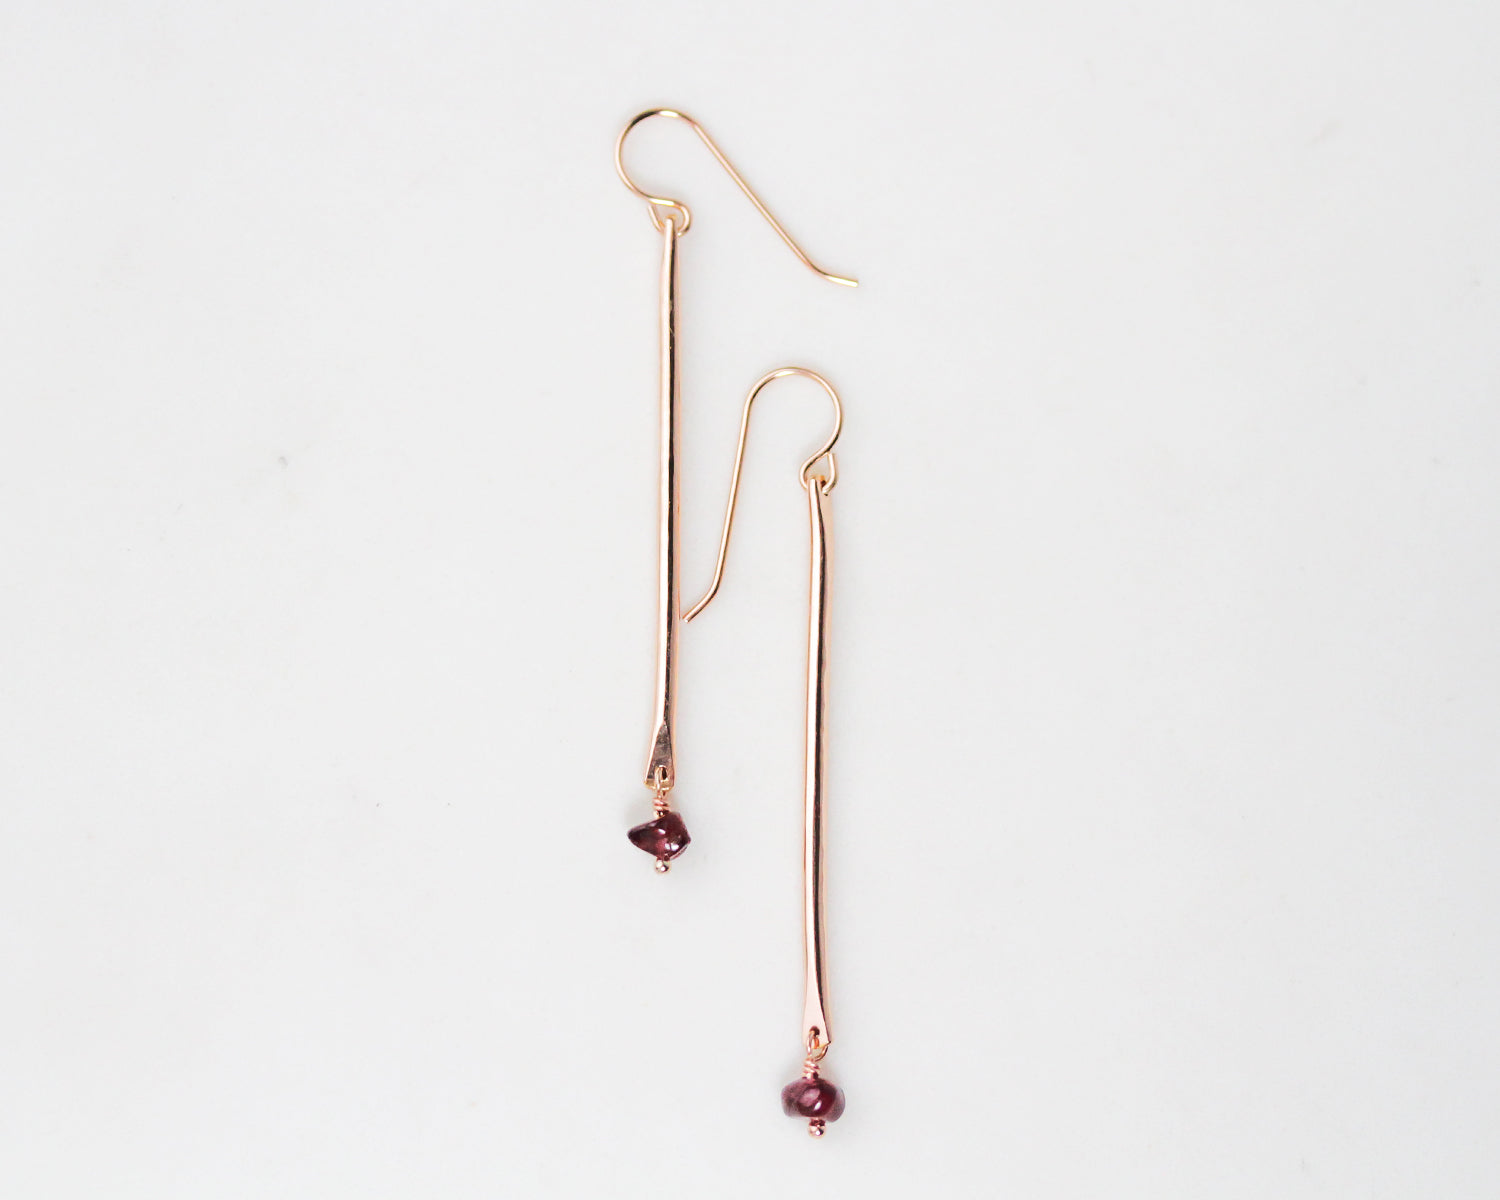 Image shows the Birthstone Pendulum Earrings in 14 karat yellow gold filled with a garnet drop. Ear wires are high quality 14 karate yellow gold filled. Personalized with your birthstone of choice. Makes a perfect, custom gift for her.